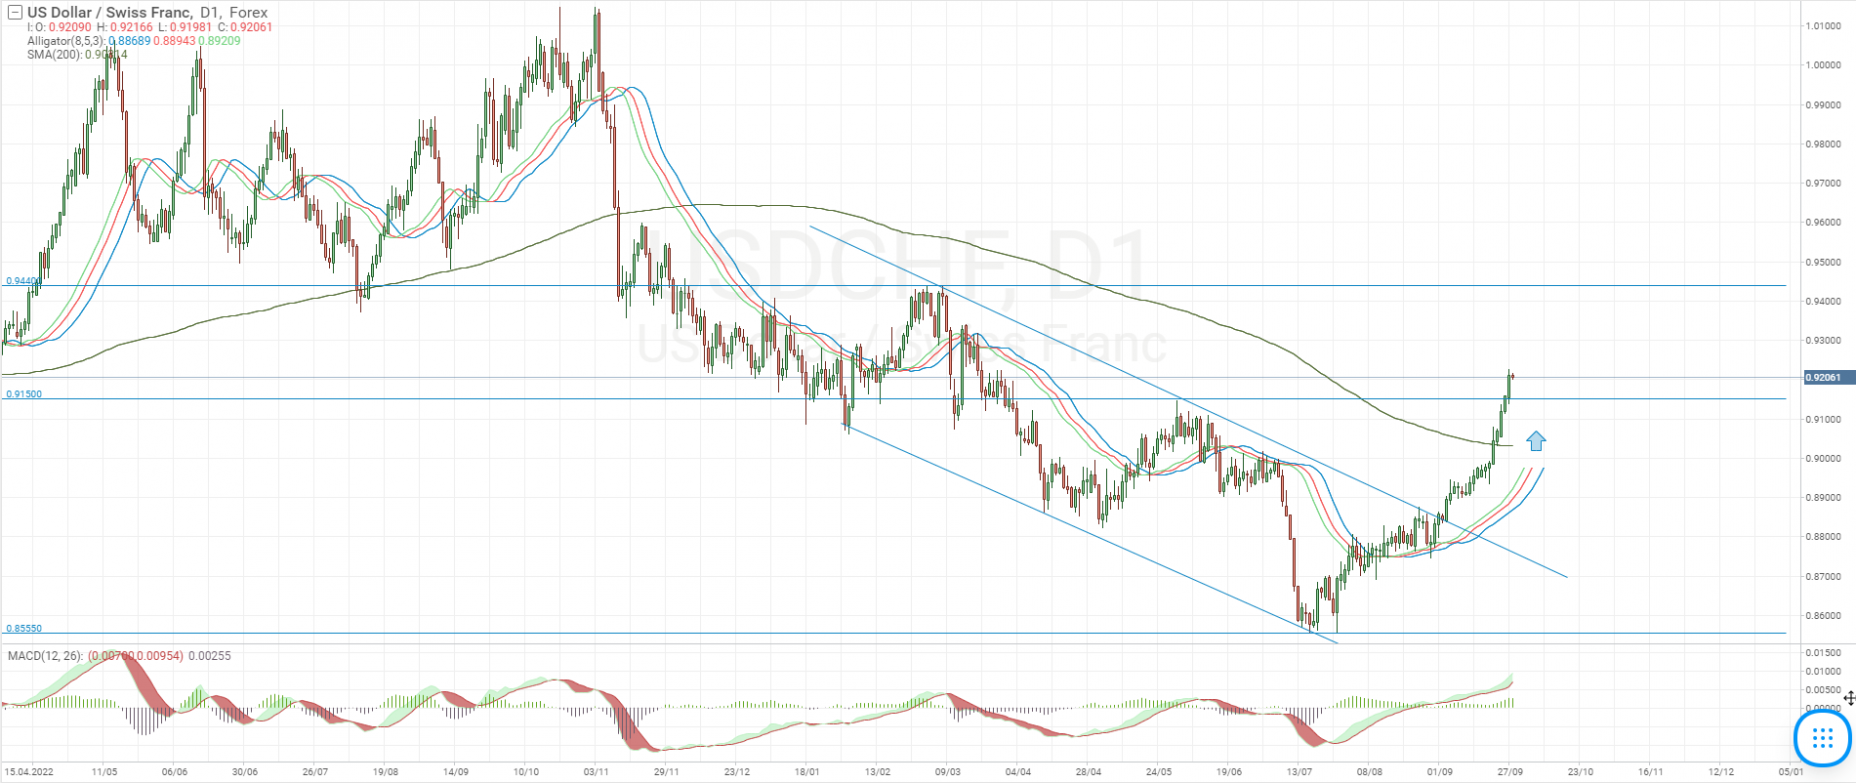 Technical analysis of the USD/CHF currency pair